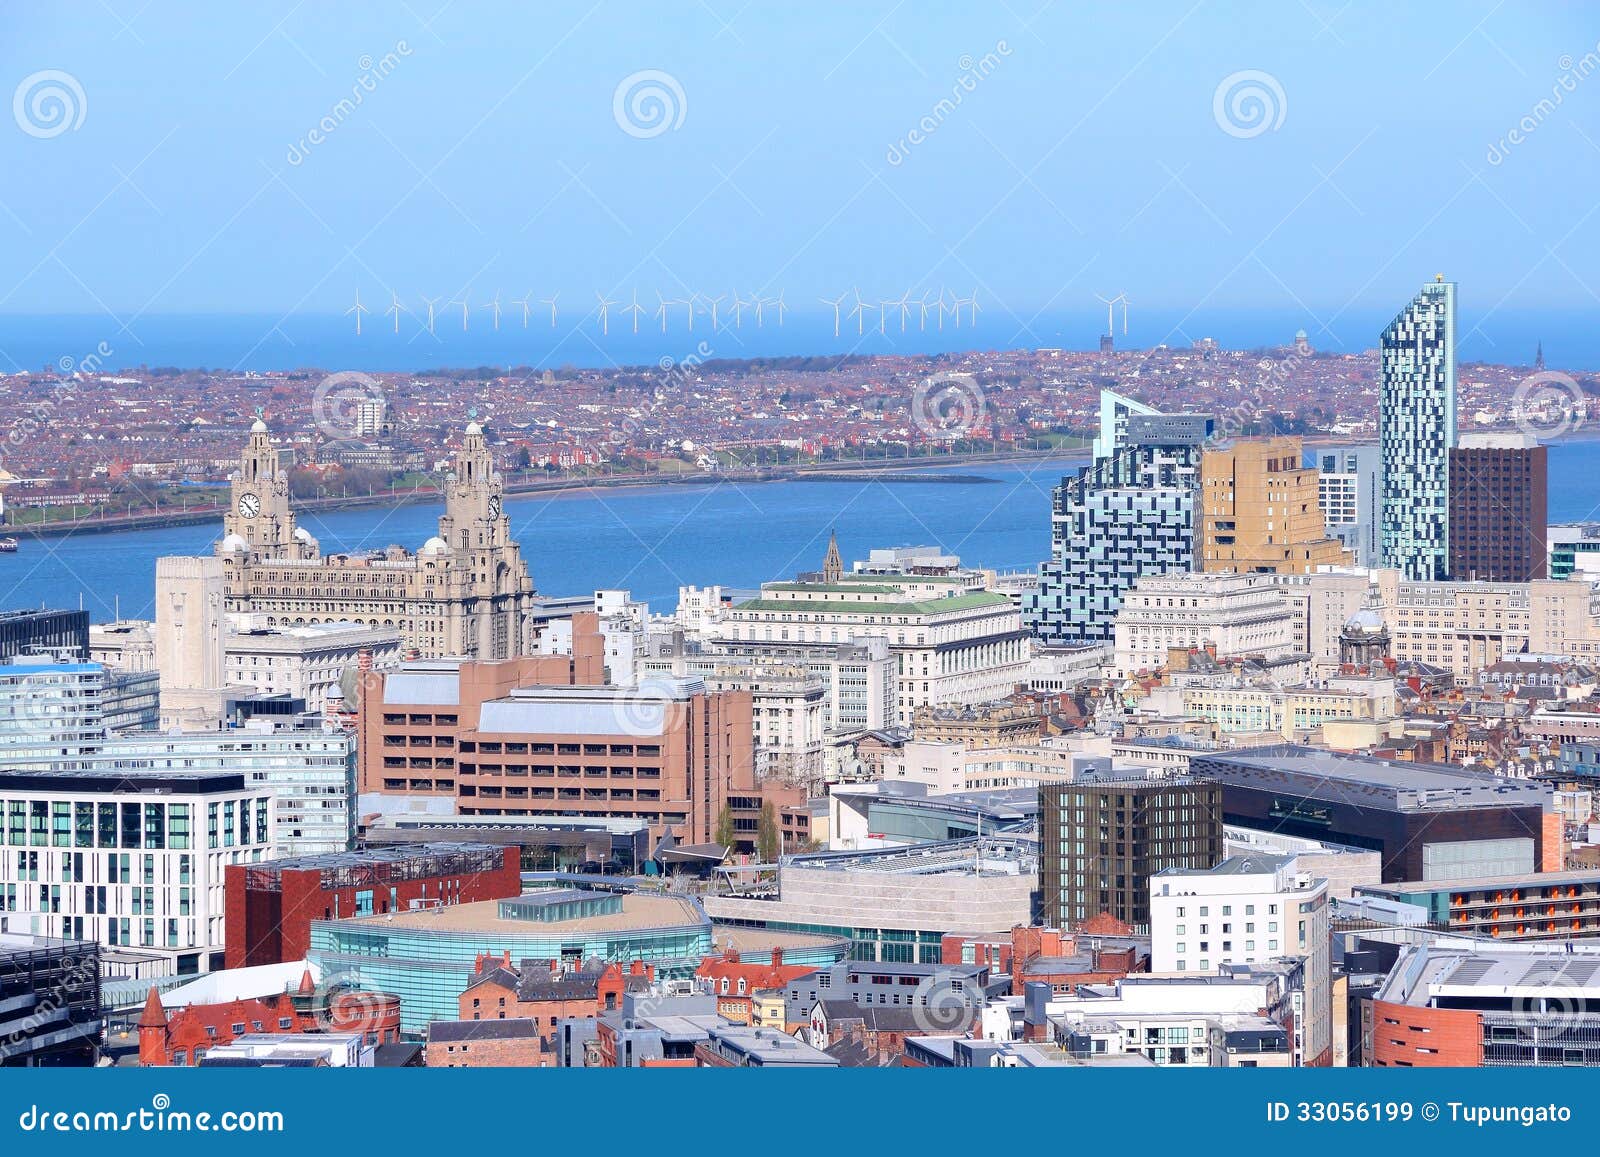 Liverpool - city in Merseyside county of North West England (UK 